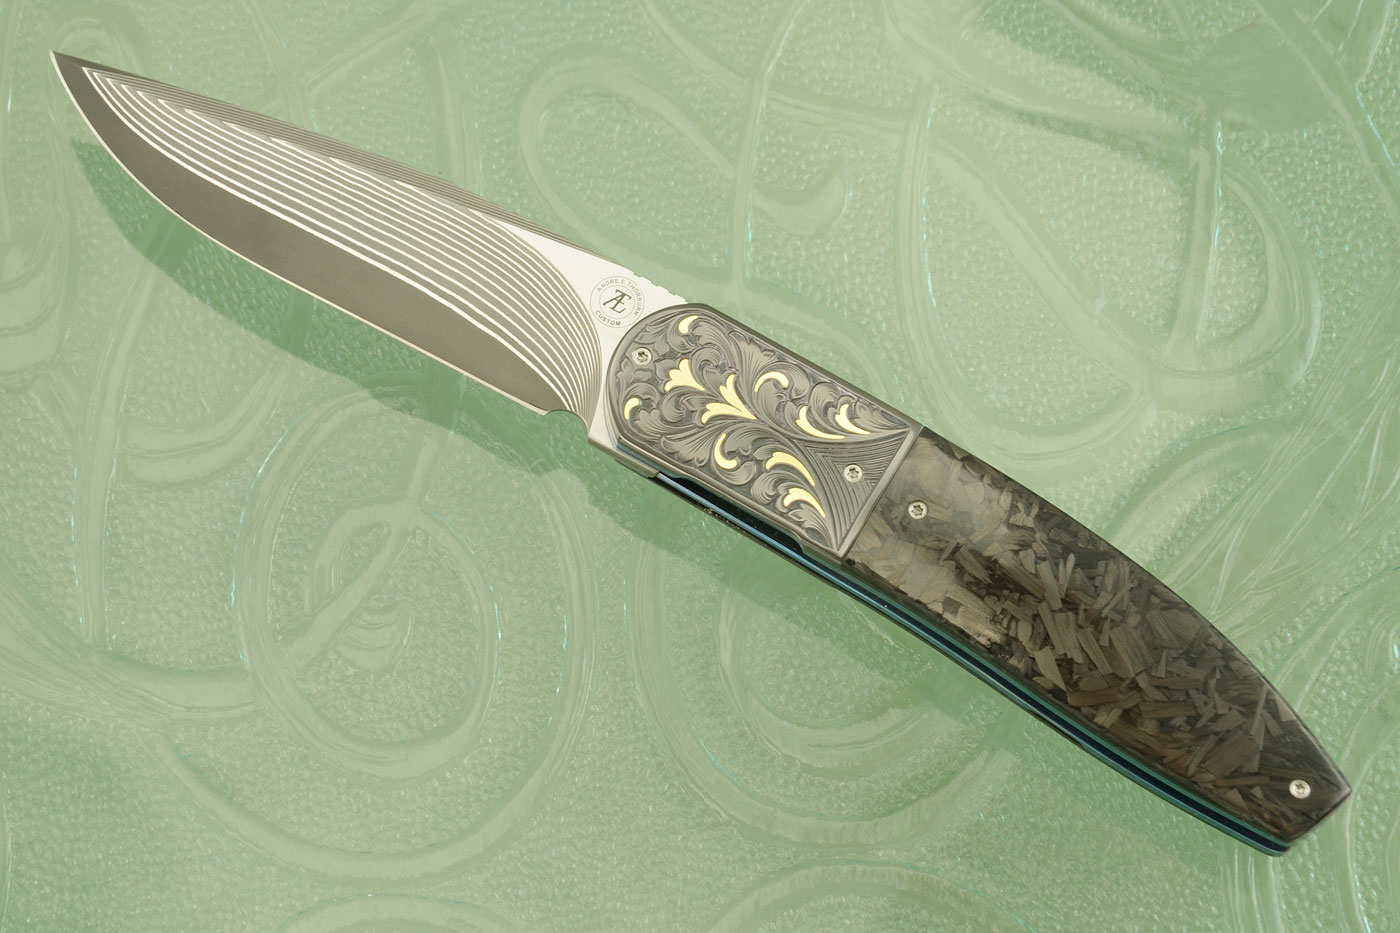 L28 Front Flipper with Shred Carbon Fiber and Engraved Zirconium with Gold Inlays (Ceramic IKBS)